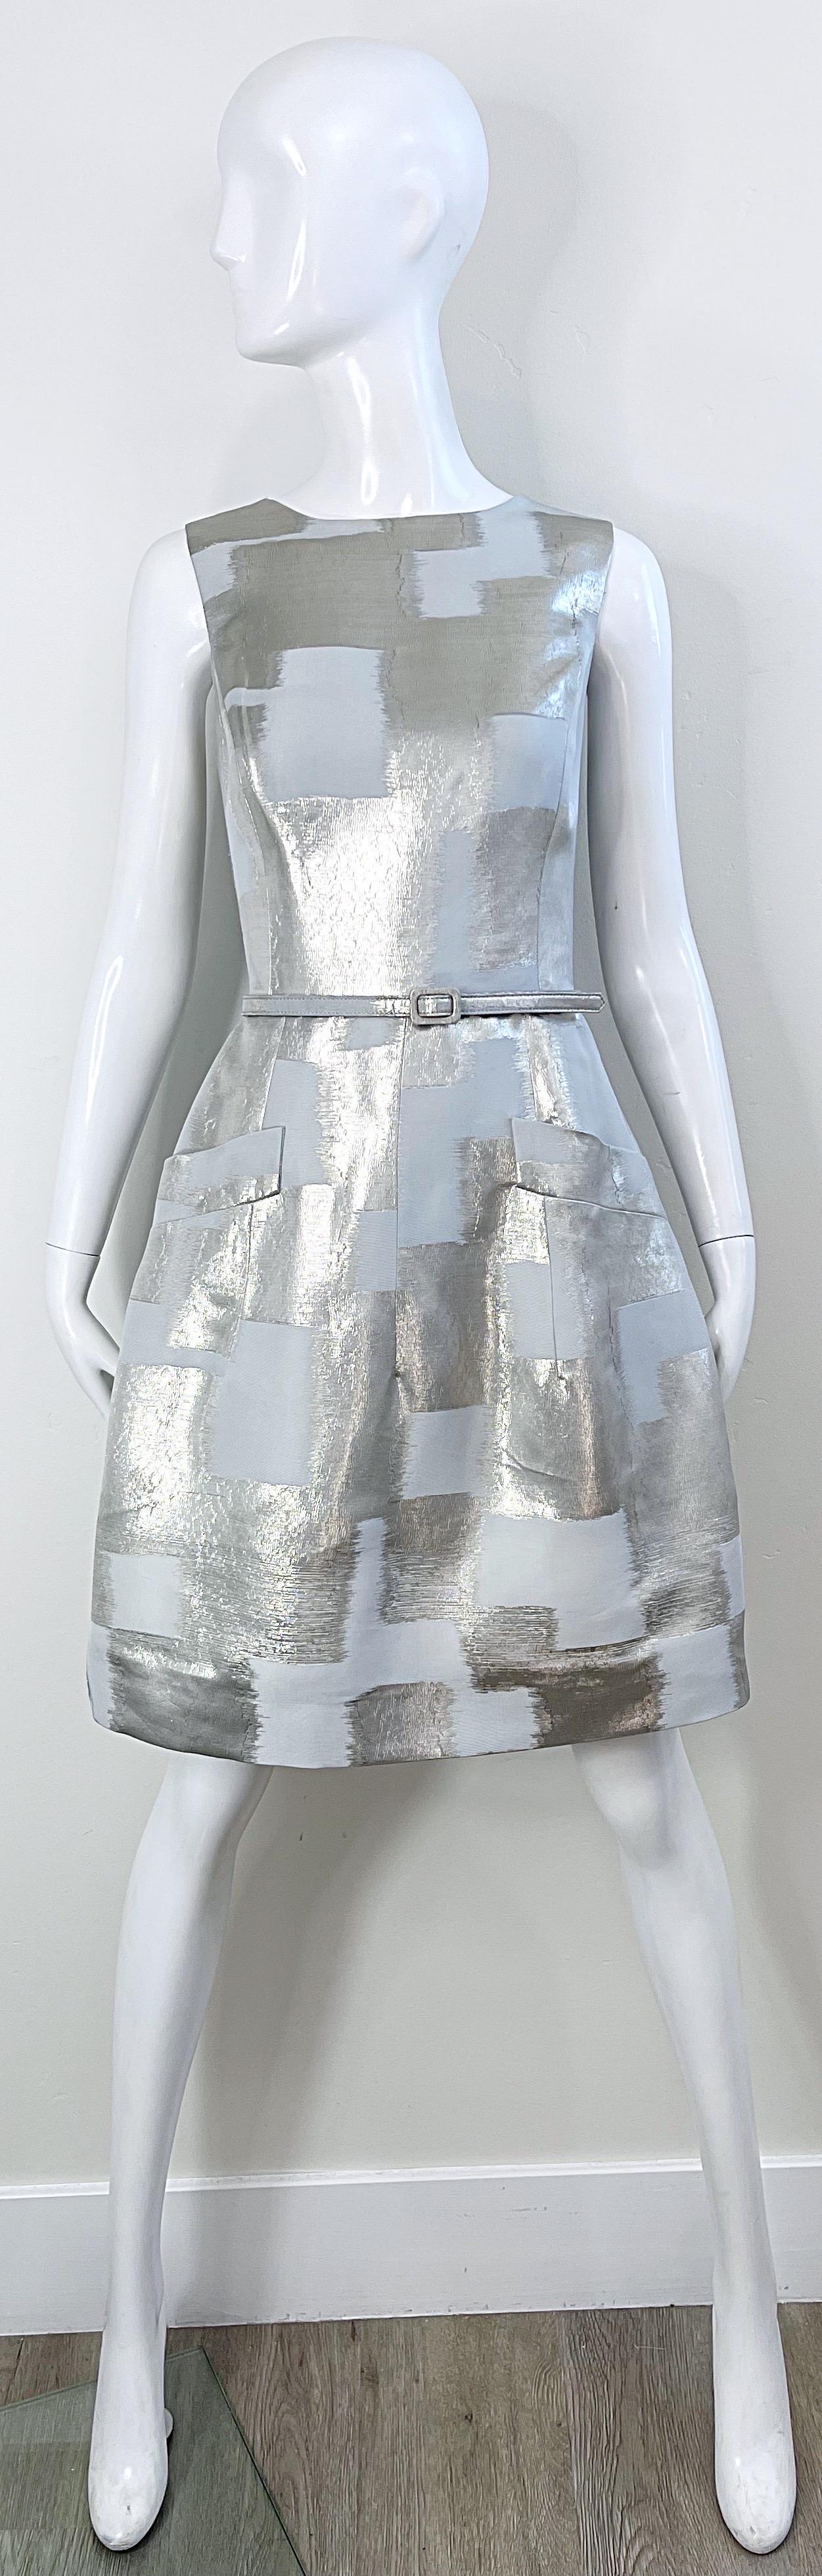 Oscar de la Renta 2000s Size 4 Silver Metallic Abstract Belted Fit n Flare Dress In Excellent Condition For Sale In San Diego, CA